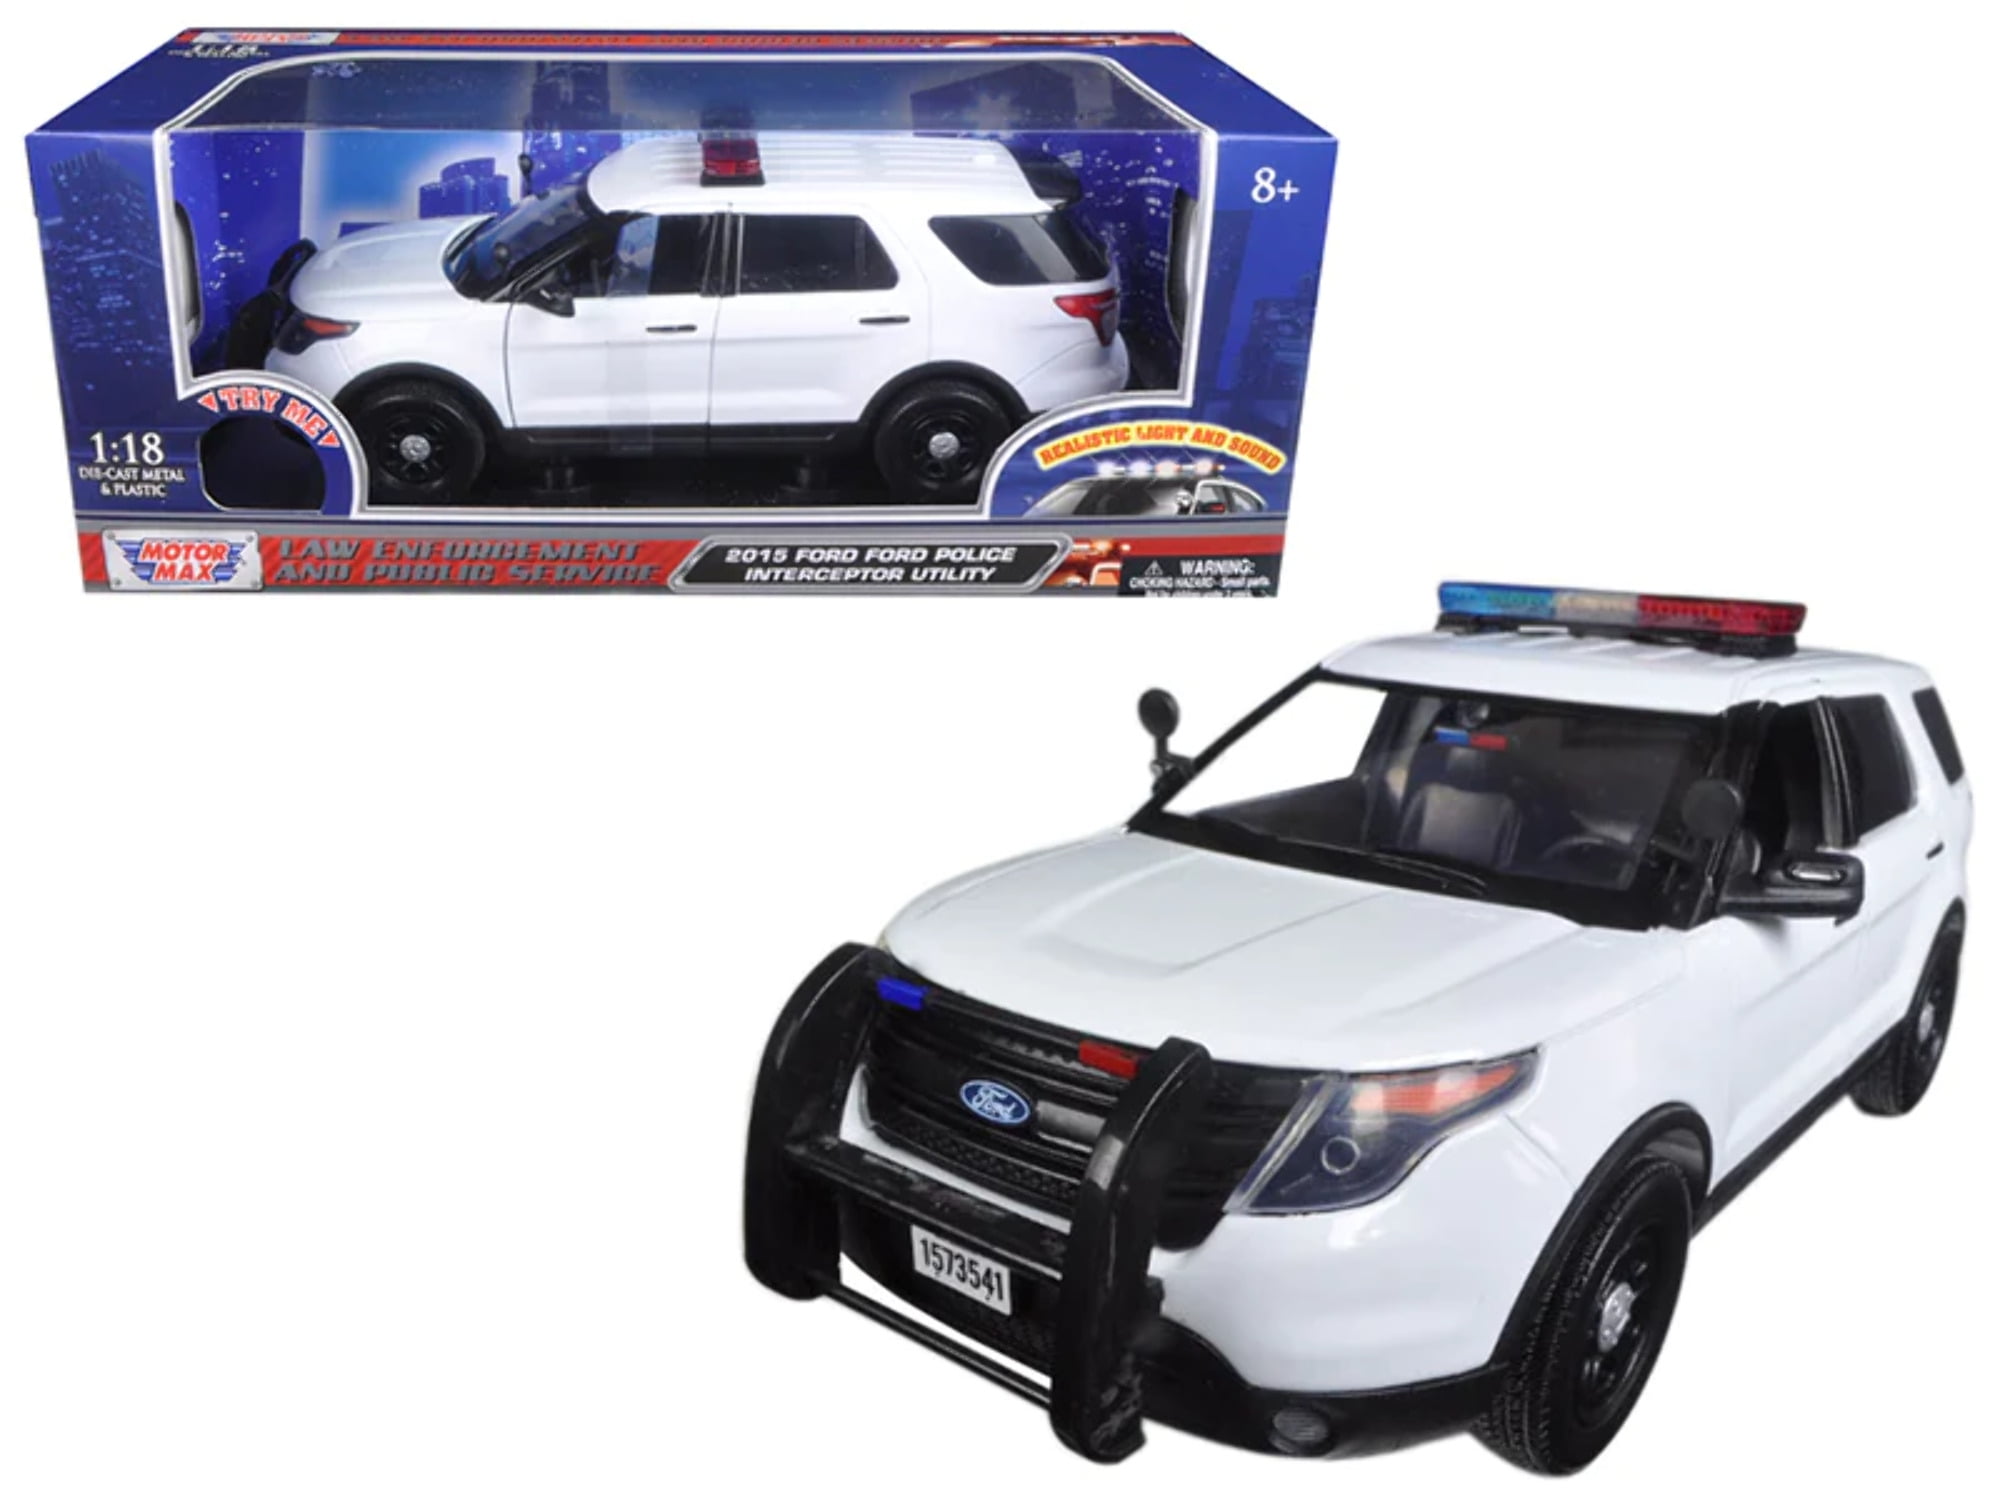 Motormax Toy 73995 1-18 2015 Ford Police Interceptor Utility Diecast Model Car with Front & Rear Lights & 2 Sounds - White